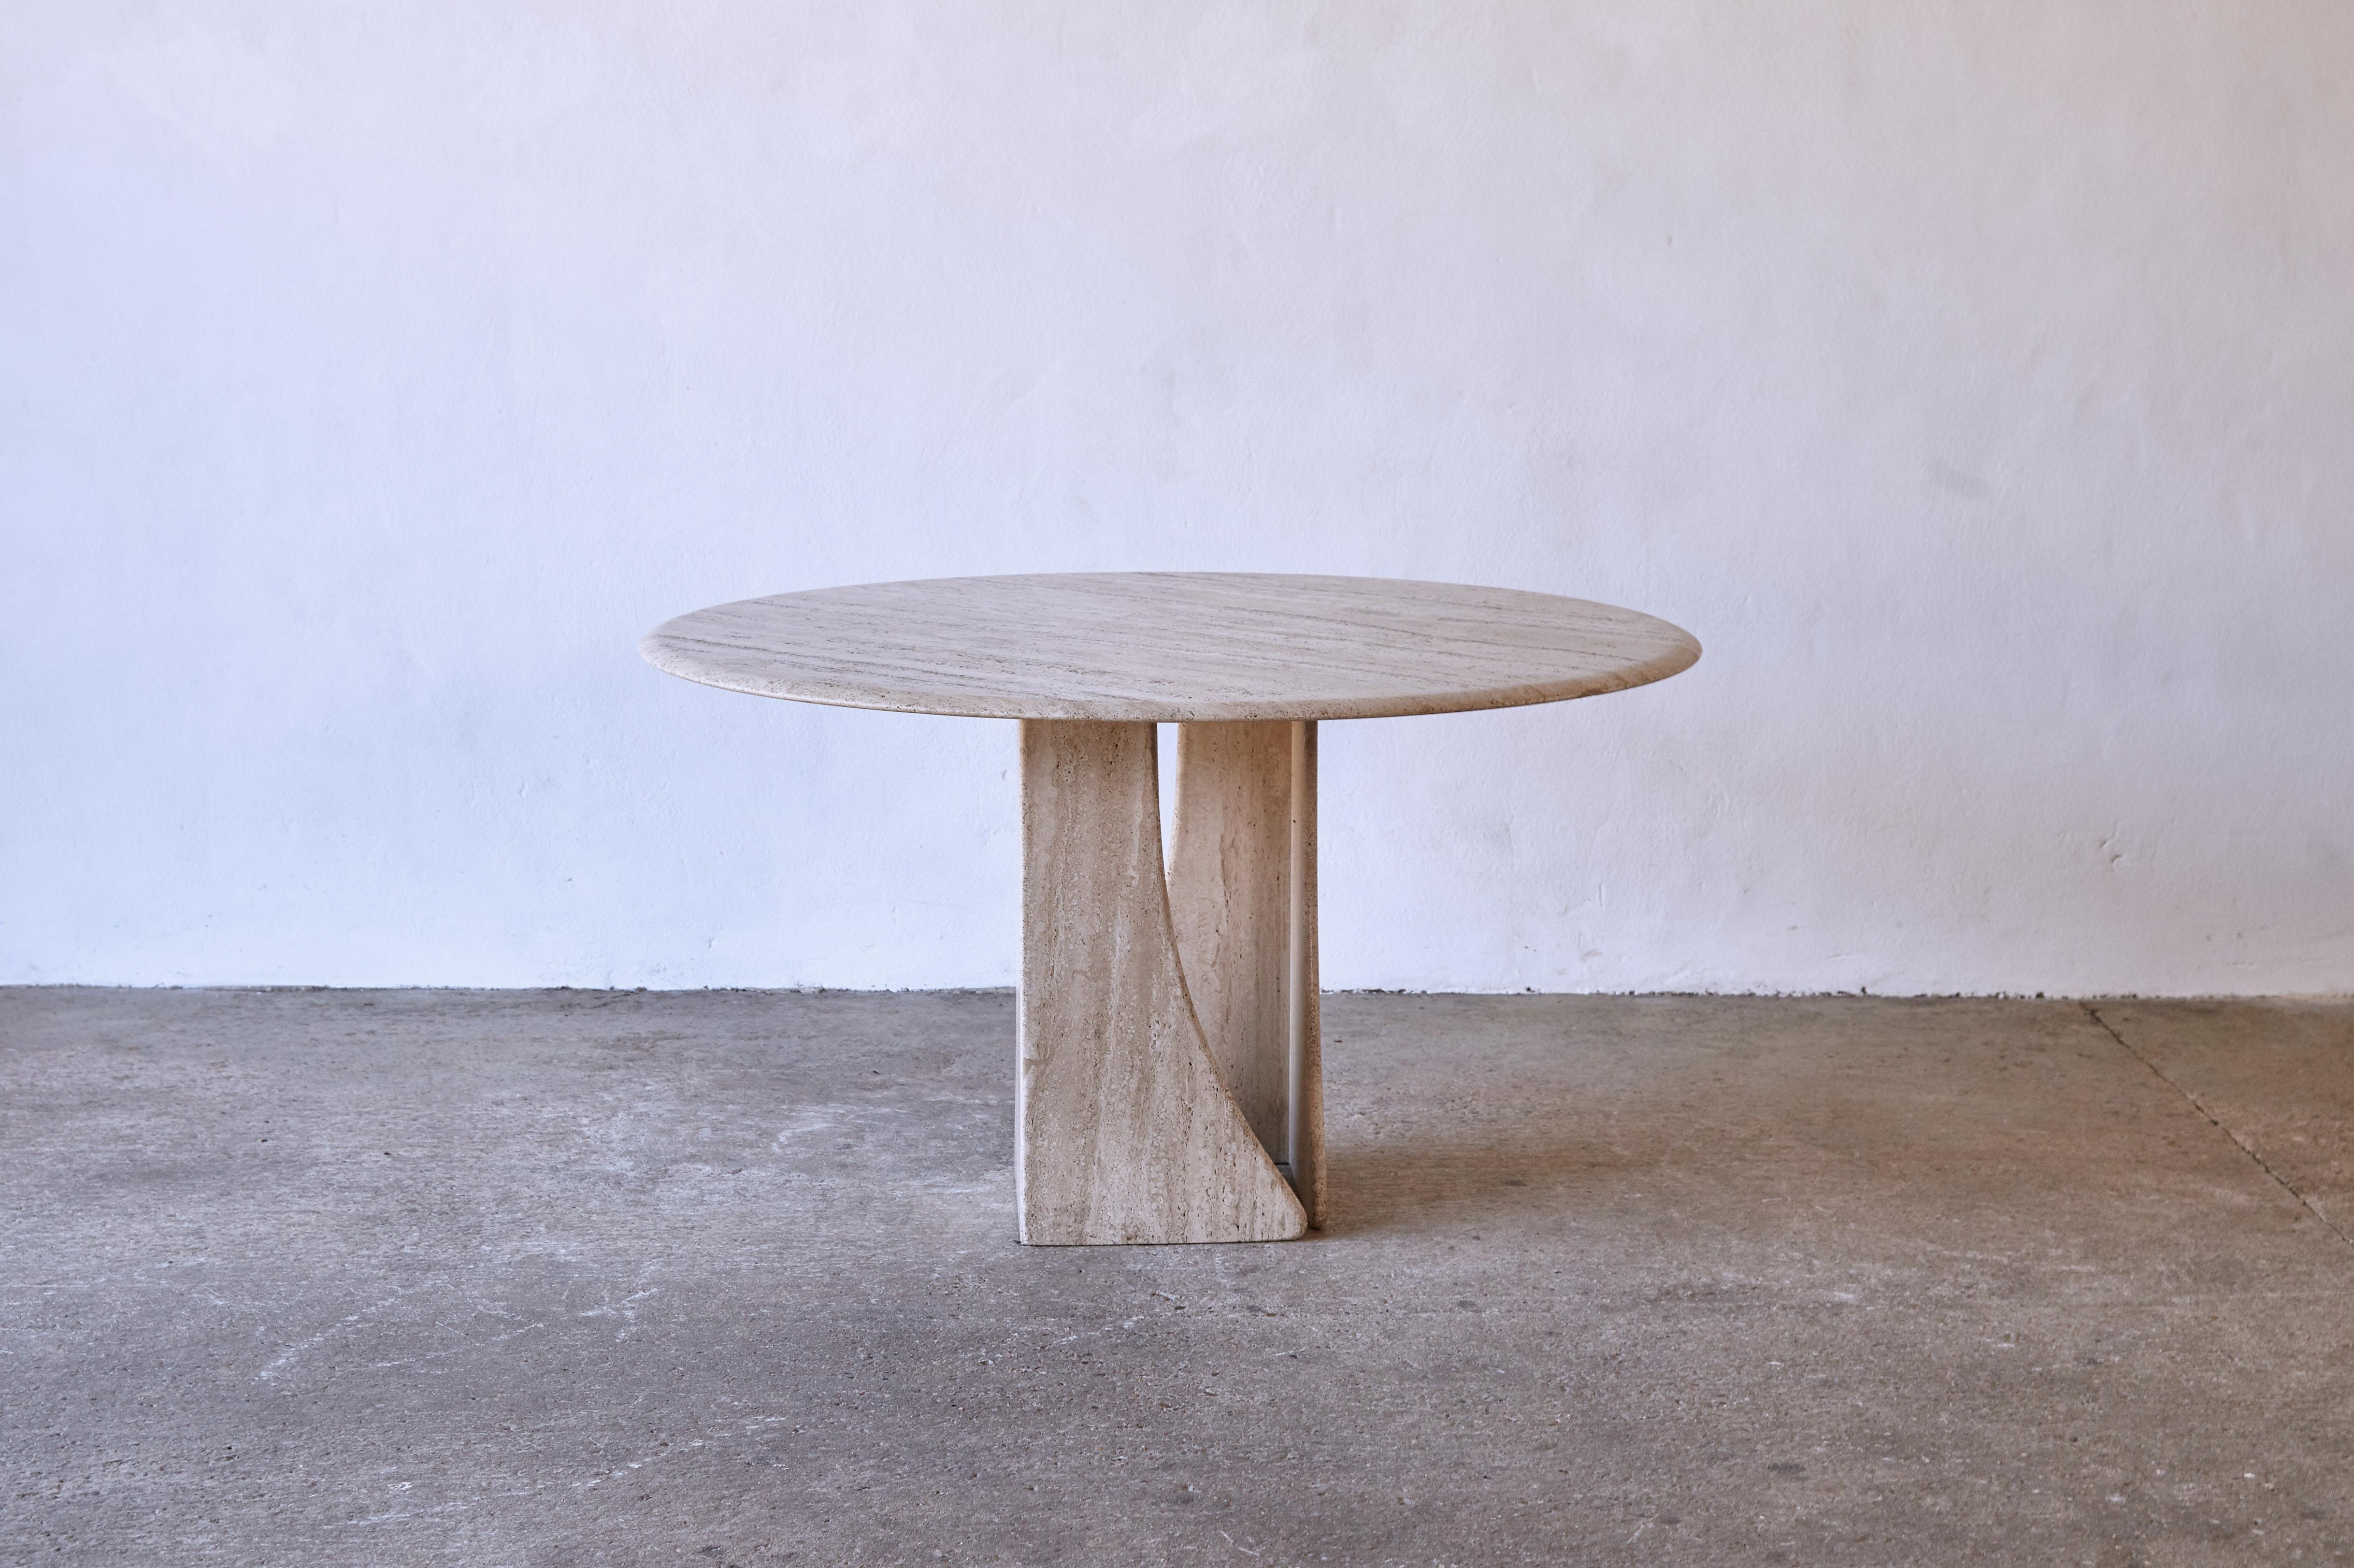 A round travertine dining table, France/Italy, 1970s. The travertine has a wonderful tone and texture. A round tabletop resting on two curved legs. Good original condition. 





Please note: Prices do not include VAT. VAT may be applied depending